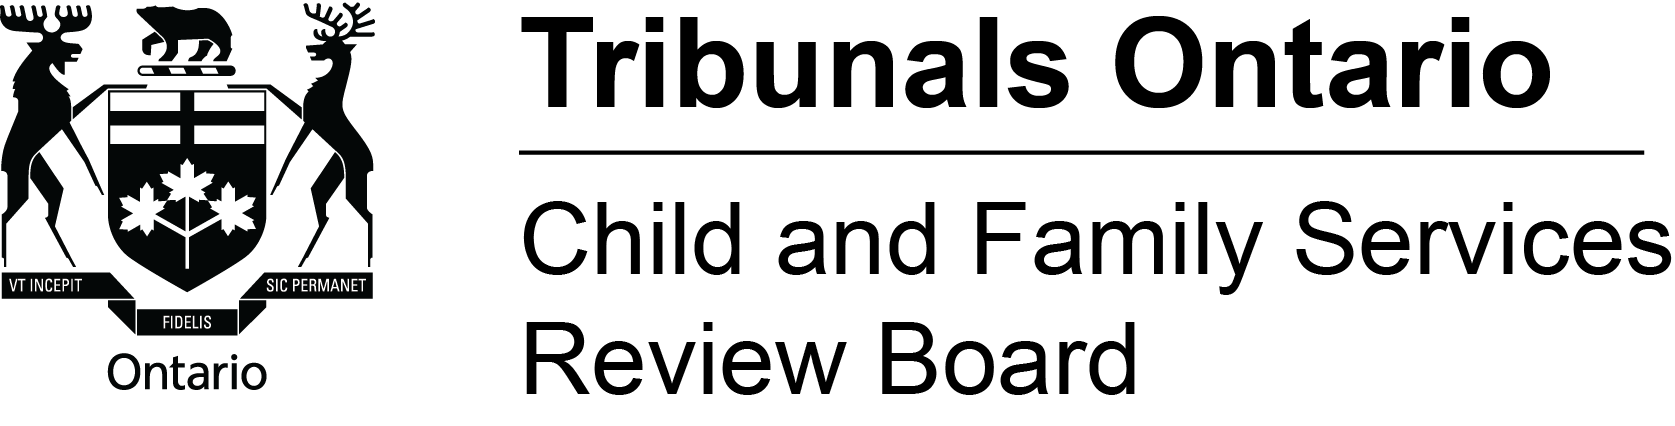 Child and Family Services Review Board logo.